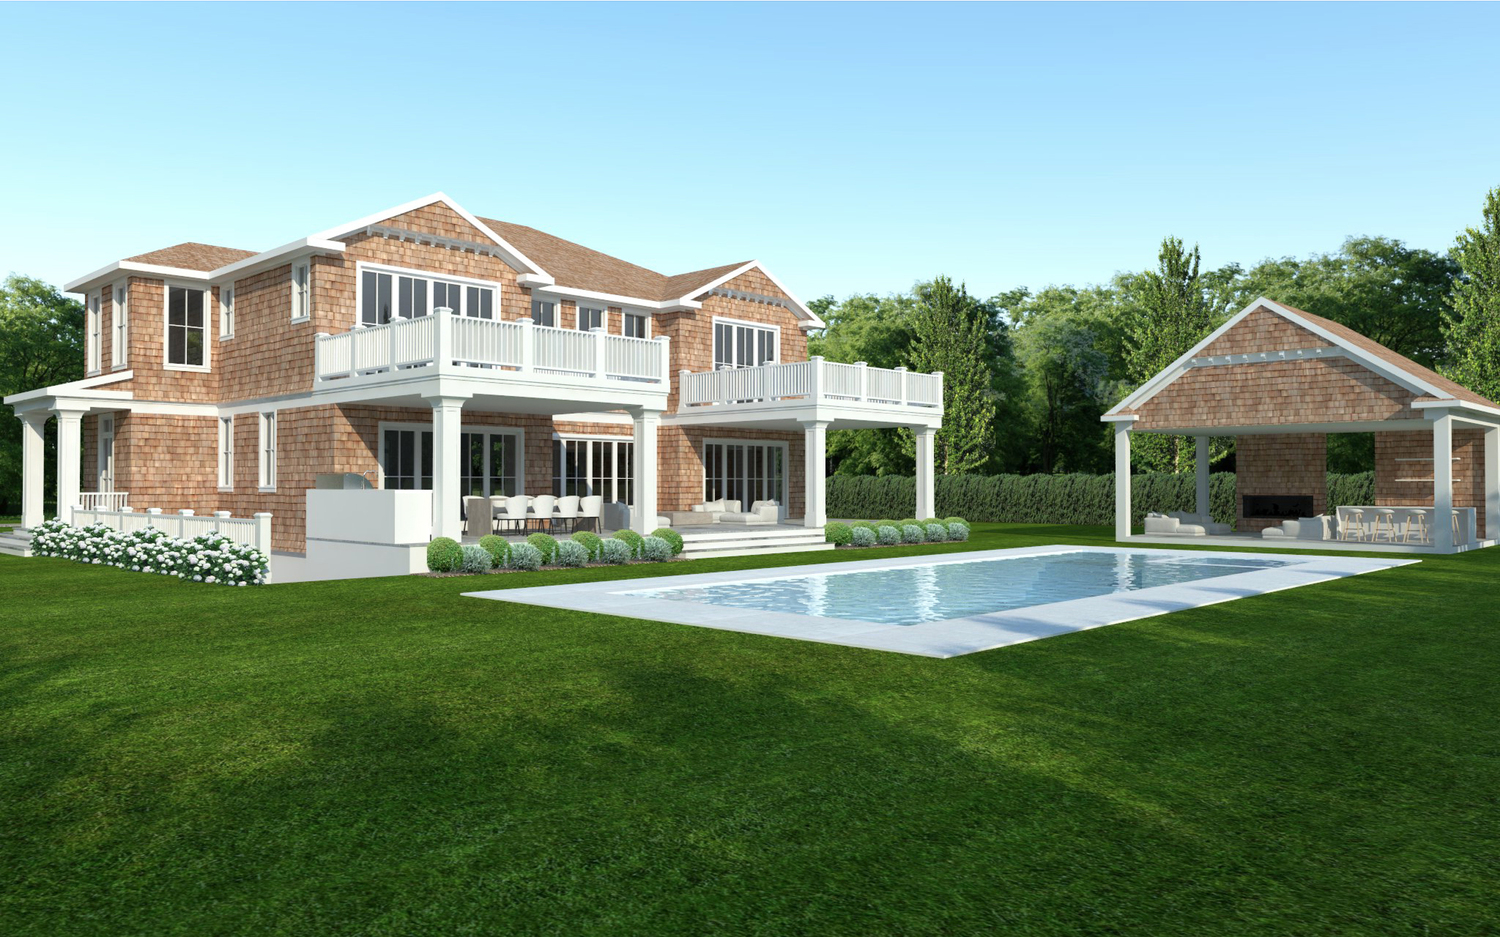 A rendering of the rear of one of the houses that have been proposed for four lots Marsden Street in Sag Harbor. MCDONOUGH AND CONROY ARCHITECTS